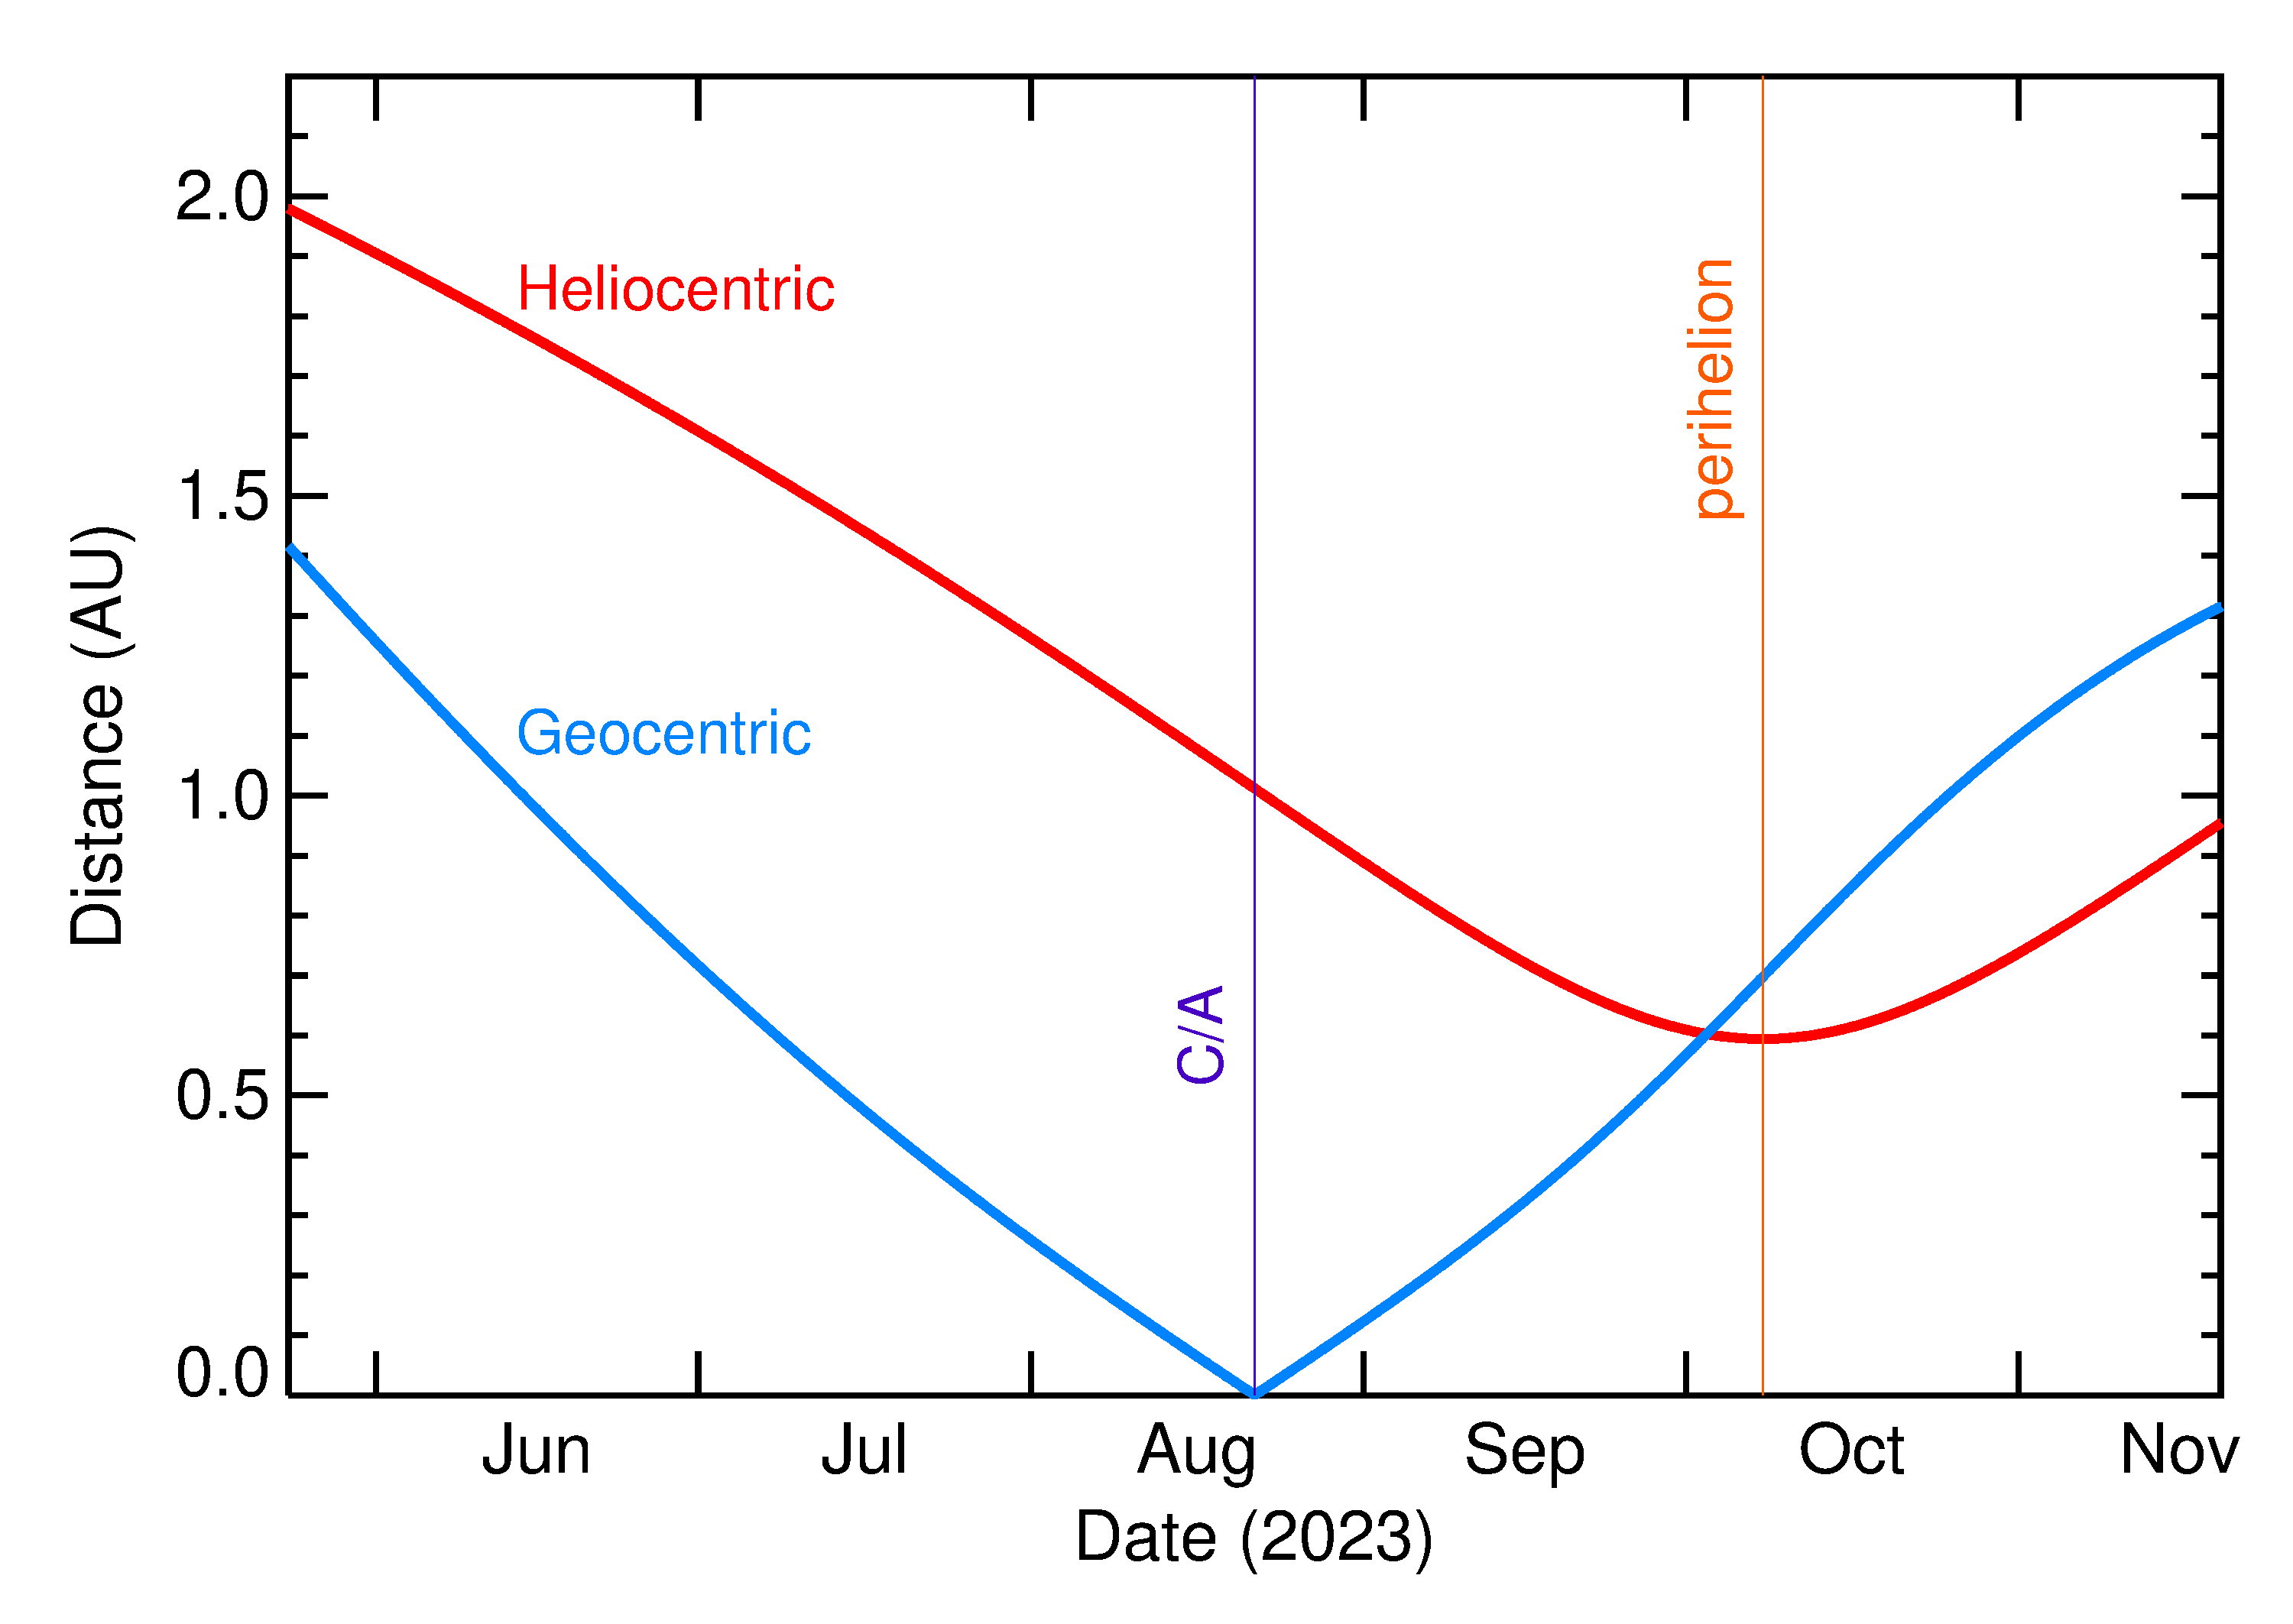 Heliocentric and Geocentric Distances of 2023 QR in the months around closest approach